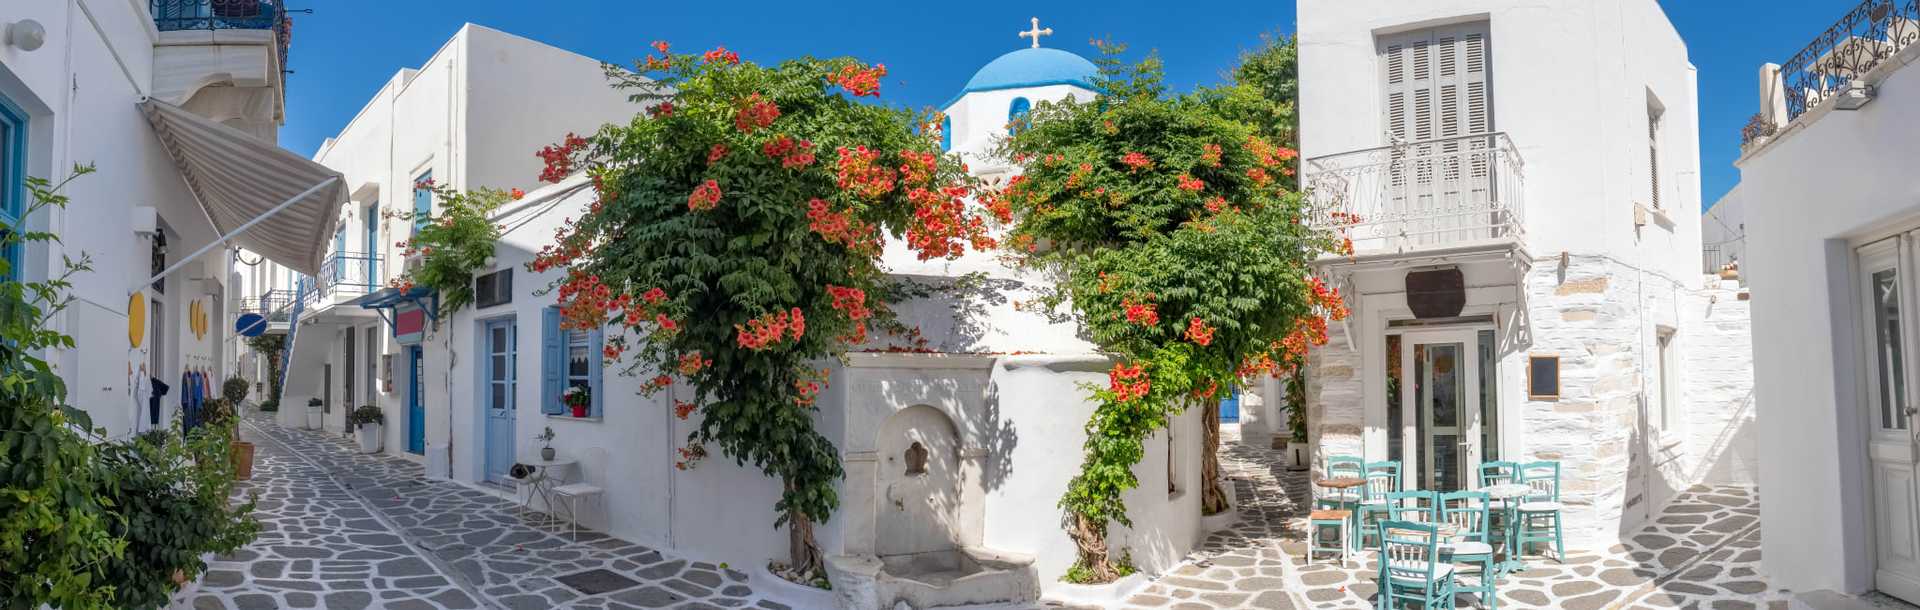 Narrow street in Greece with cozy outdoor cafe and traditional greek church in Parikia village on Paros island, Cyclades.